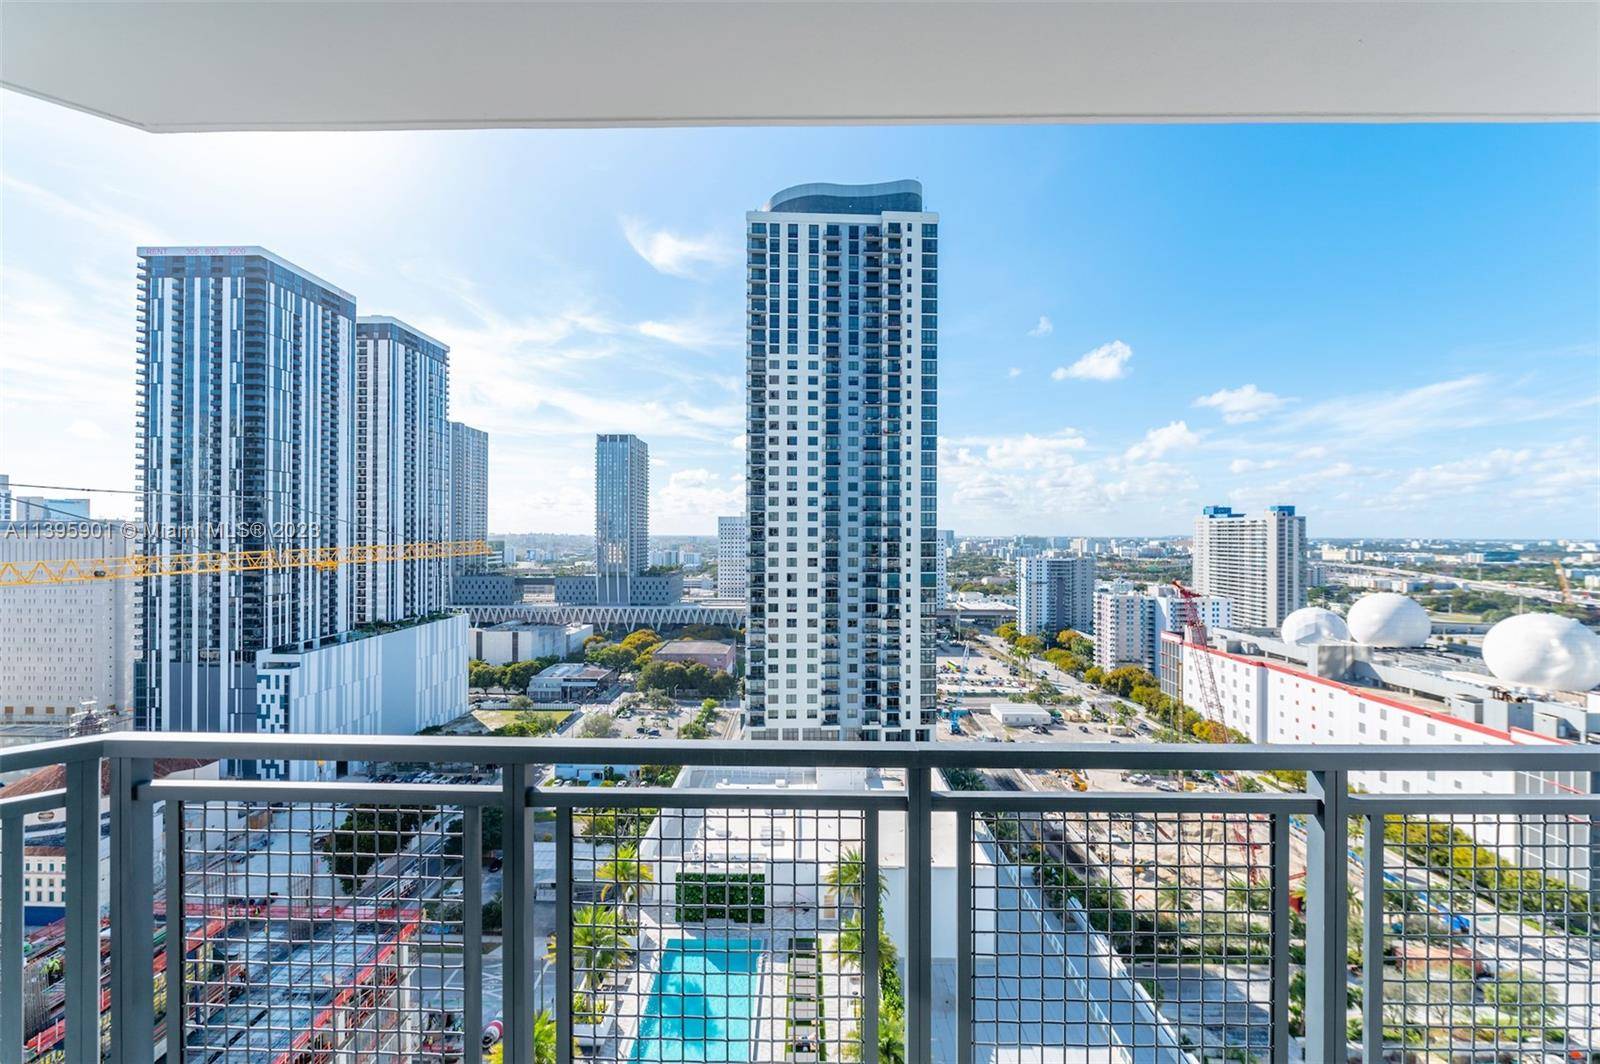 Studio luxury apartment for rent for 30 days or more short term or long term at the Bezel Miami in Downtown, with beautiful design The Bezel is luxury living close ...